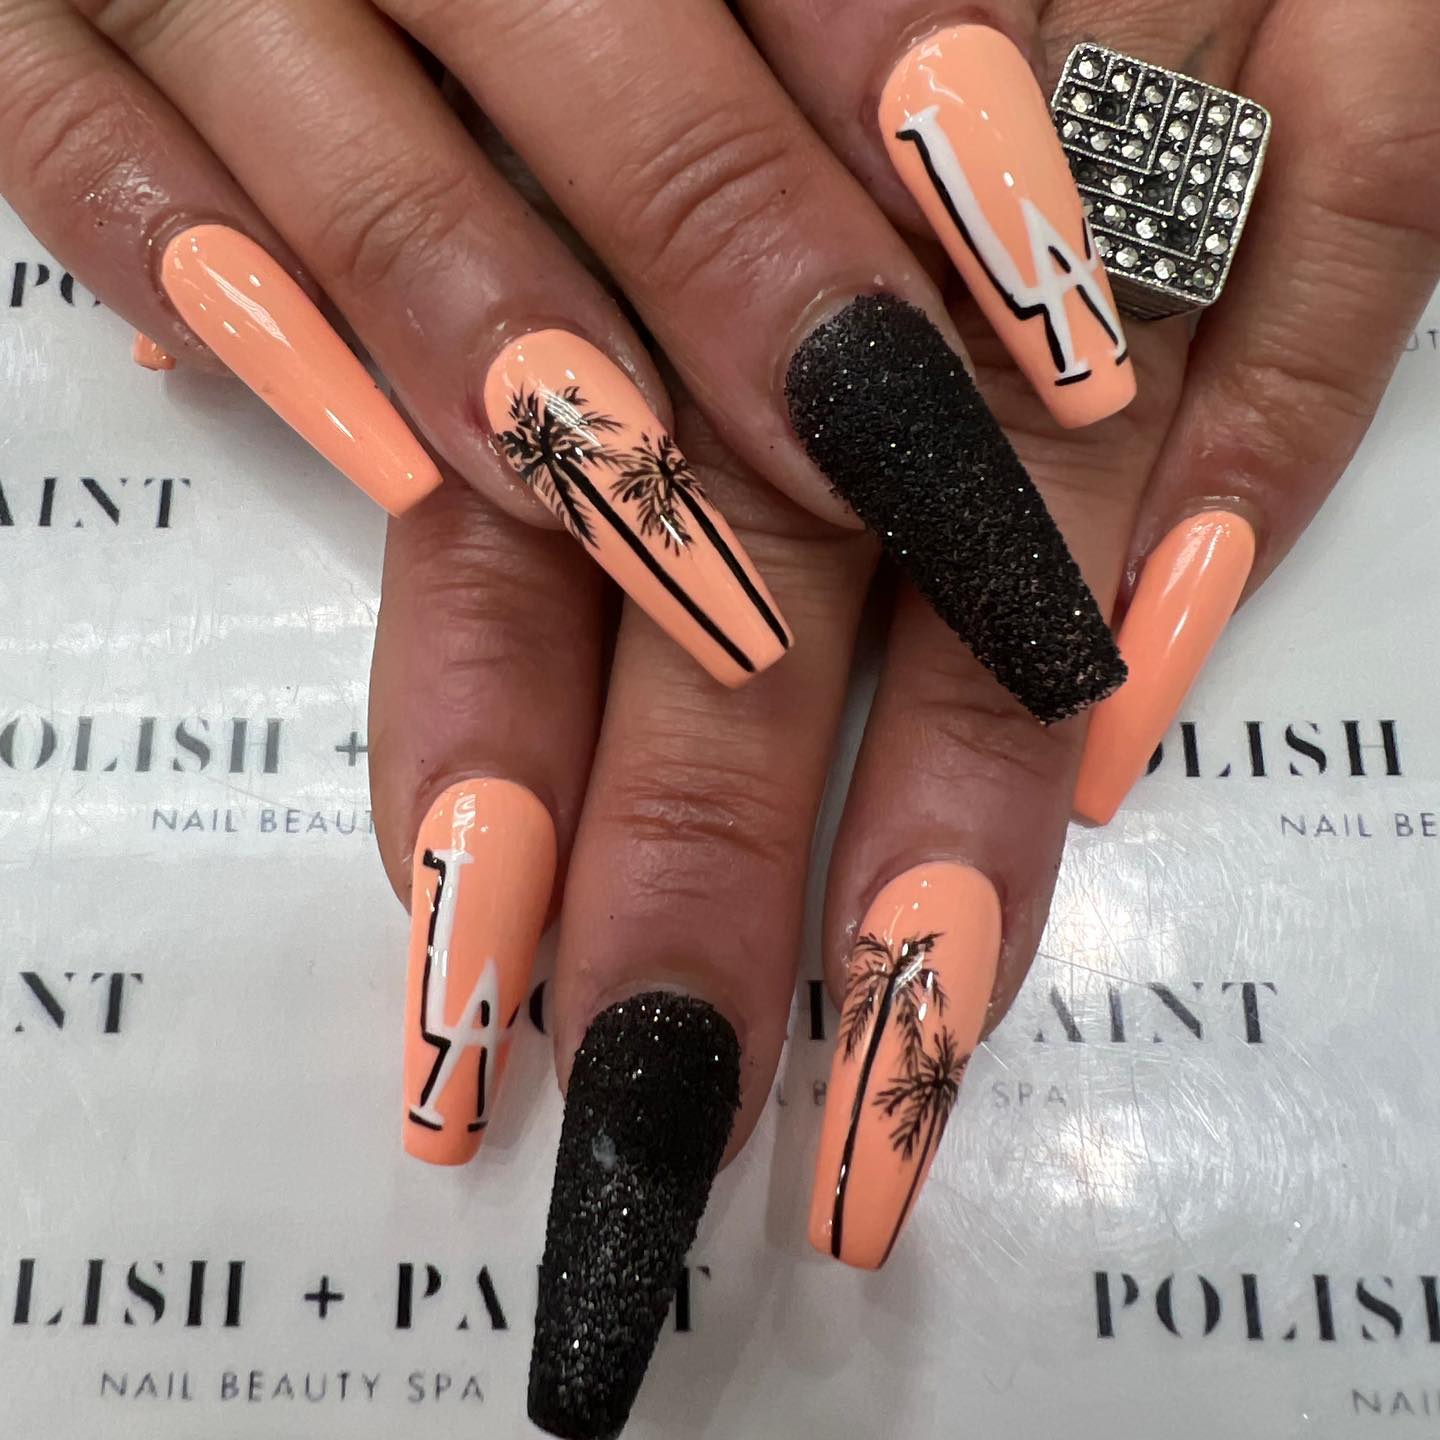 Coral and black nails such as these will look feminine and party perfect. Show them off and know that not a lot of women will have something similar.